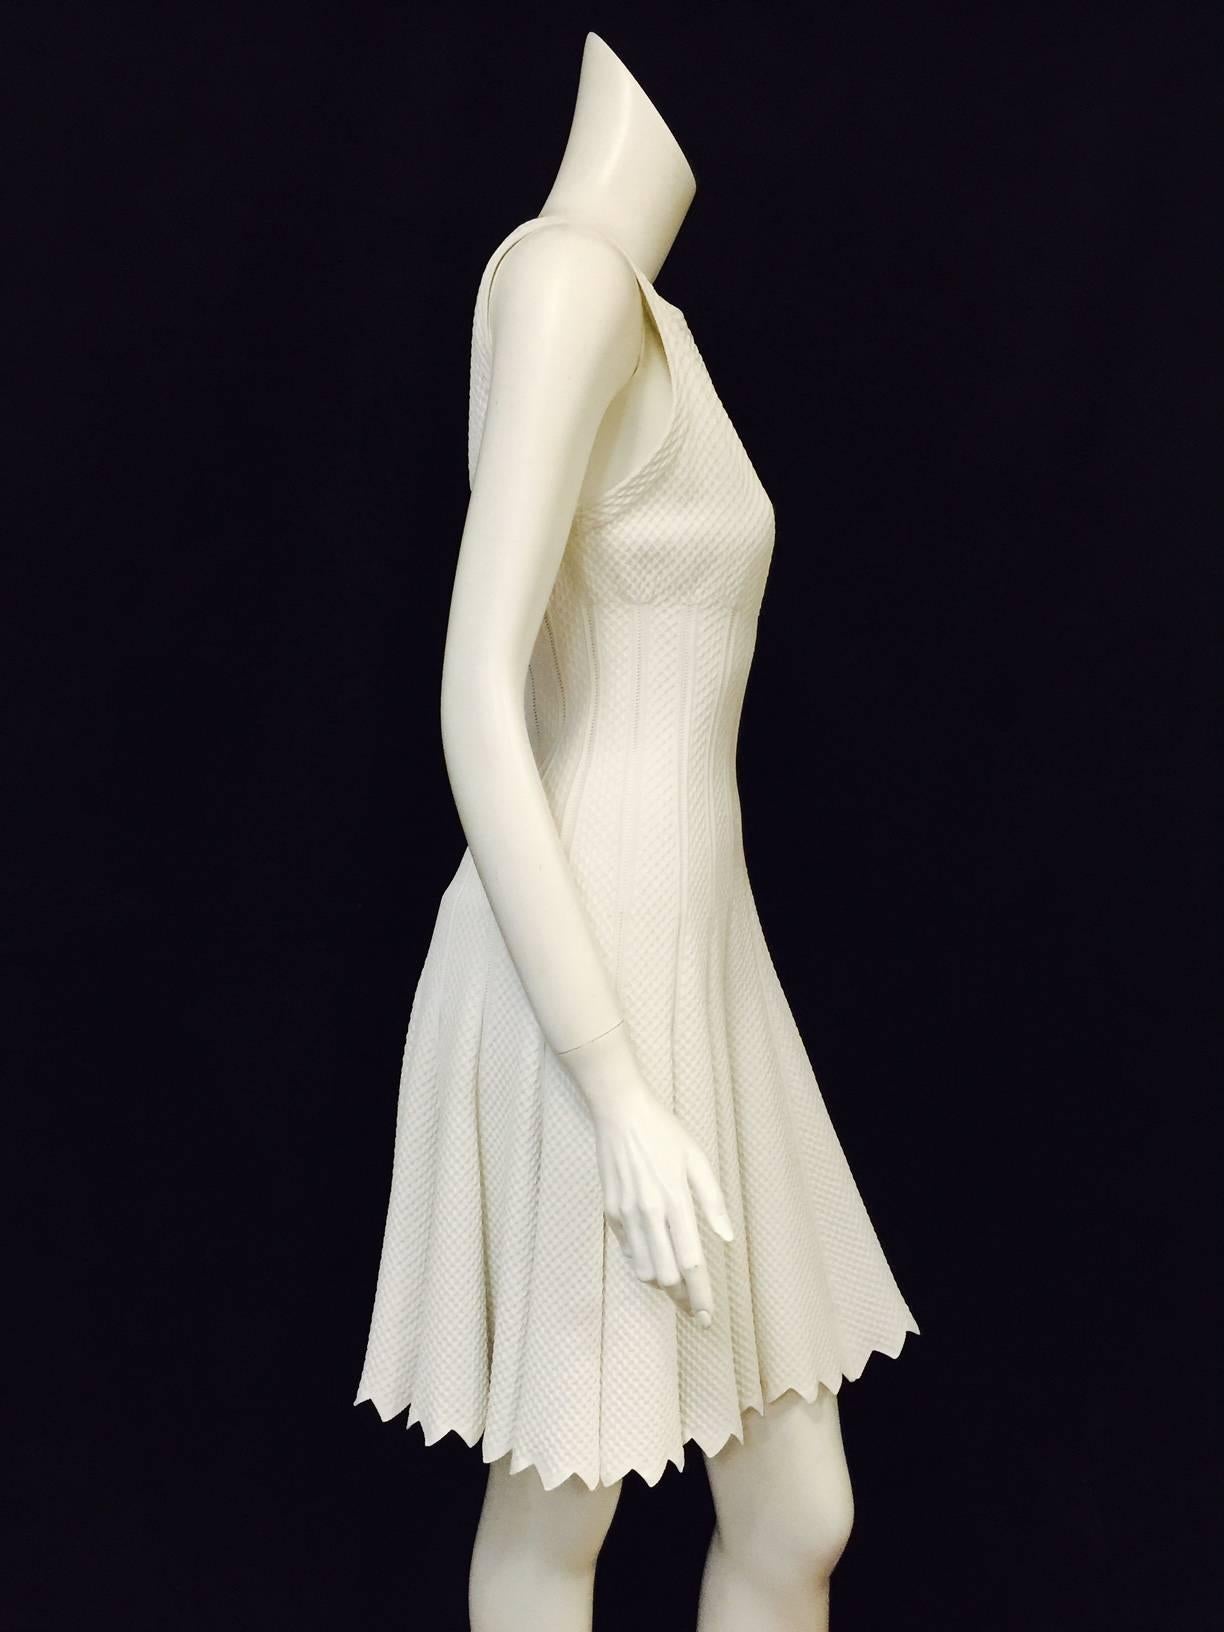 Iconic Azzedine Alaia White Sleeveless Stretch Dress  In Excellent Condition For Sale In Palm Beach, FL